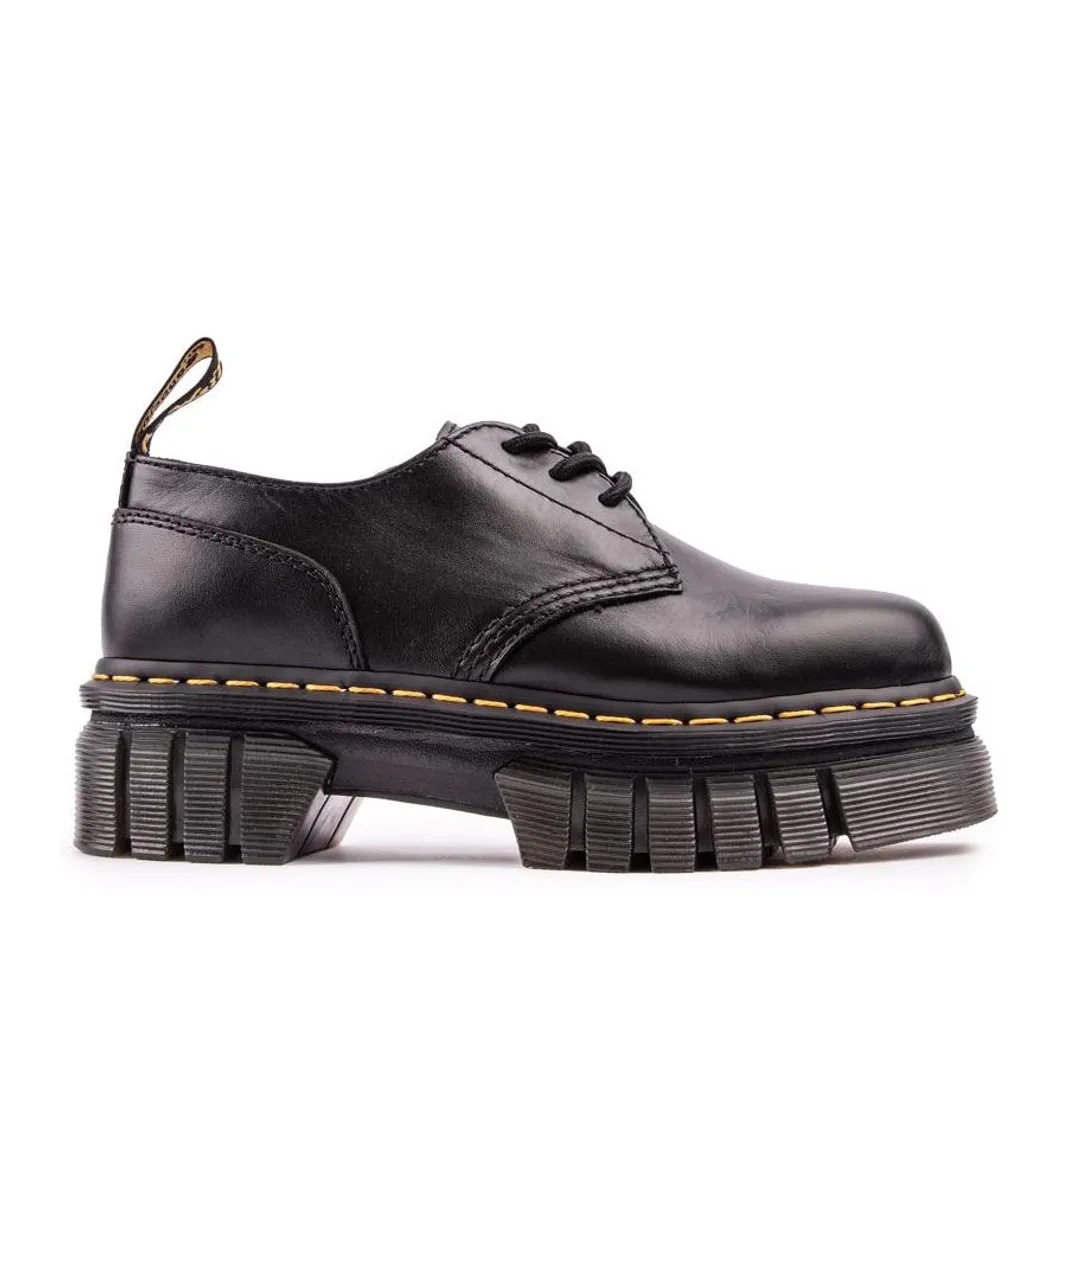 Dr Martens Womens Audrick 3-eye Shoes - Black Leather